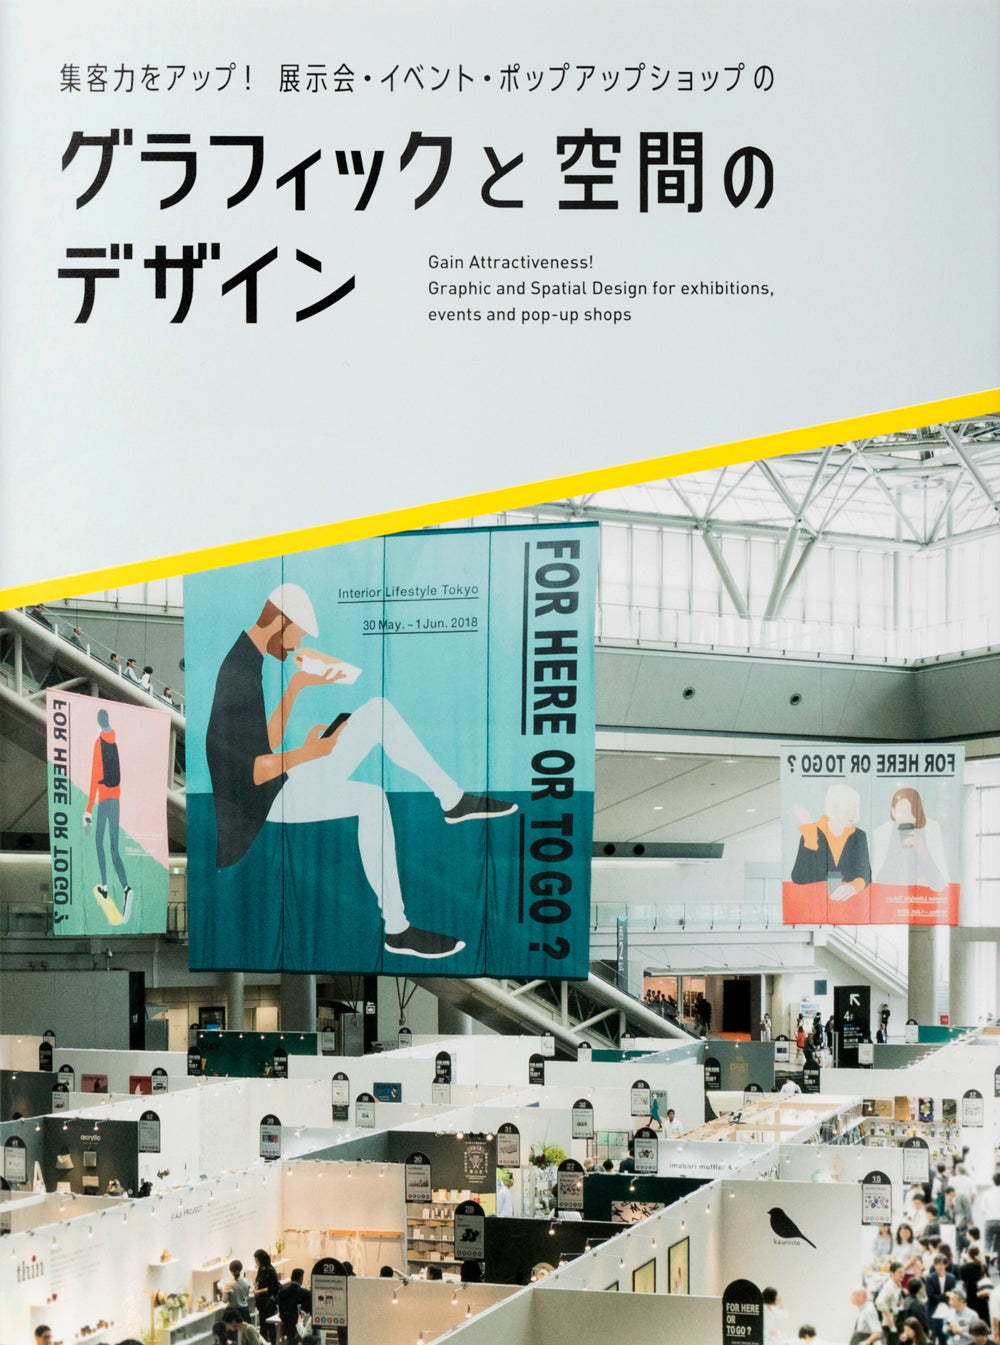 Gain Attractiveness! Graphic and Spatial Design for Exhibitions, Events and Pop-up Shops (Japanese only, mostly visual) cover